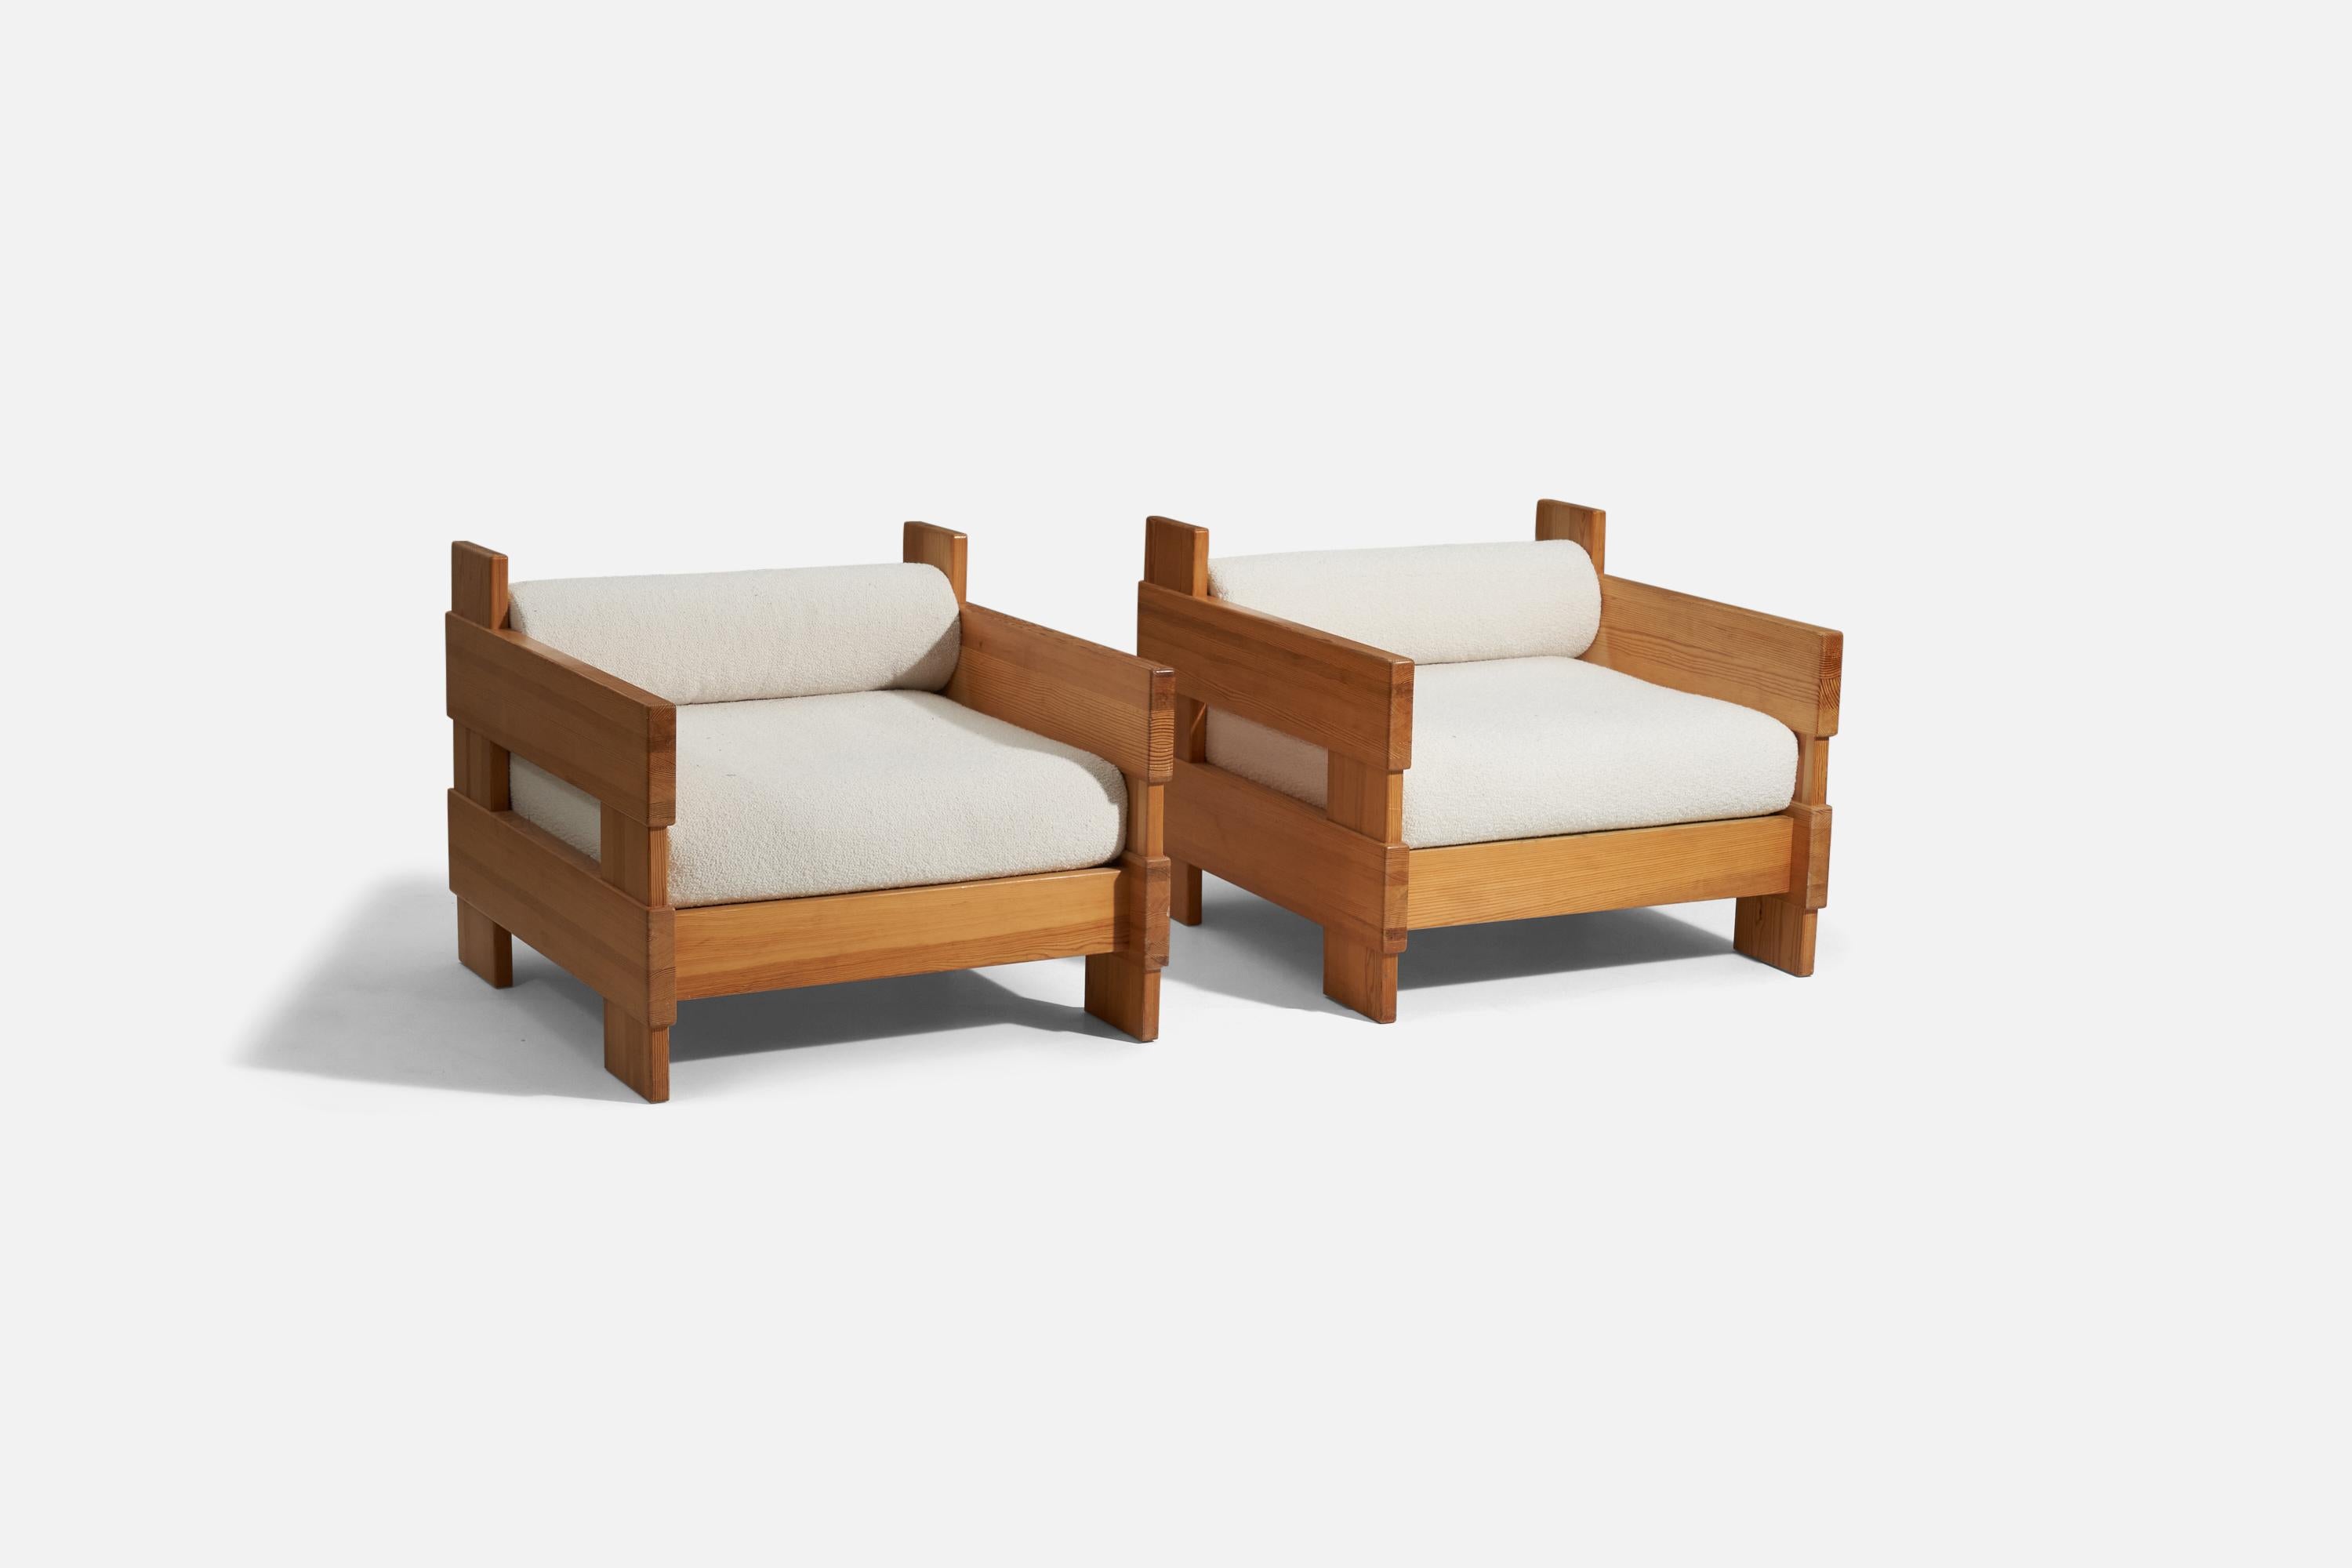 A pair of modernist lounge chair. Designed and made by a Finnish cabinetmaker, 1960s-1970s. In solid pine. Cushions upholstered in brand new high-end bouclé fabric.

Other designers of the period include Axel Einar Hjorth, Pierre Chapo, Charlotte